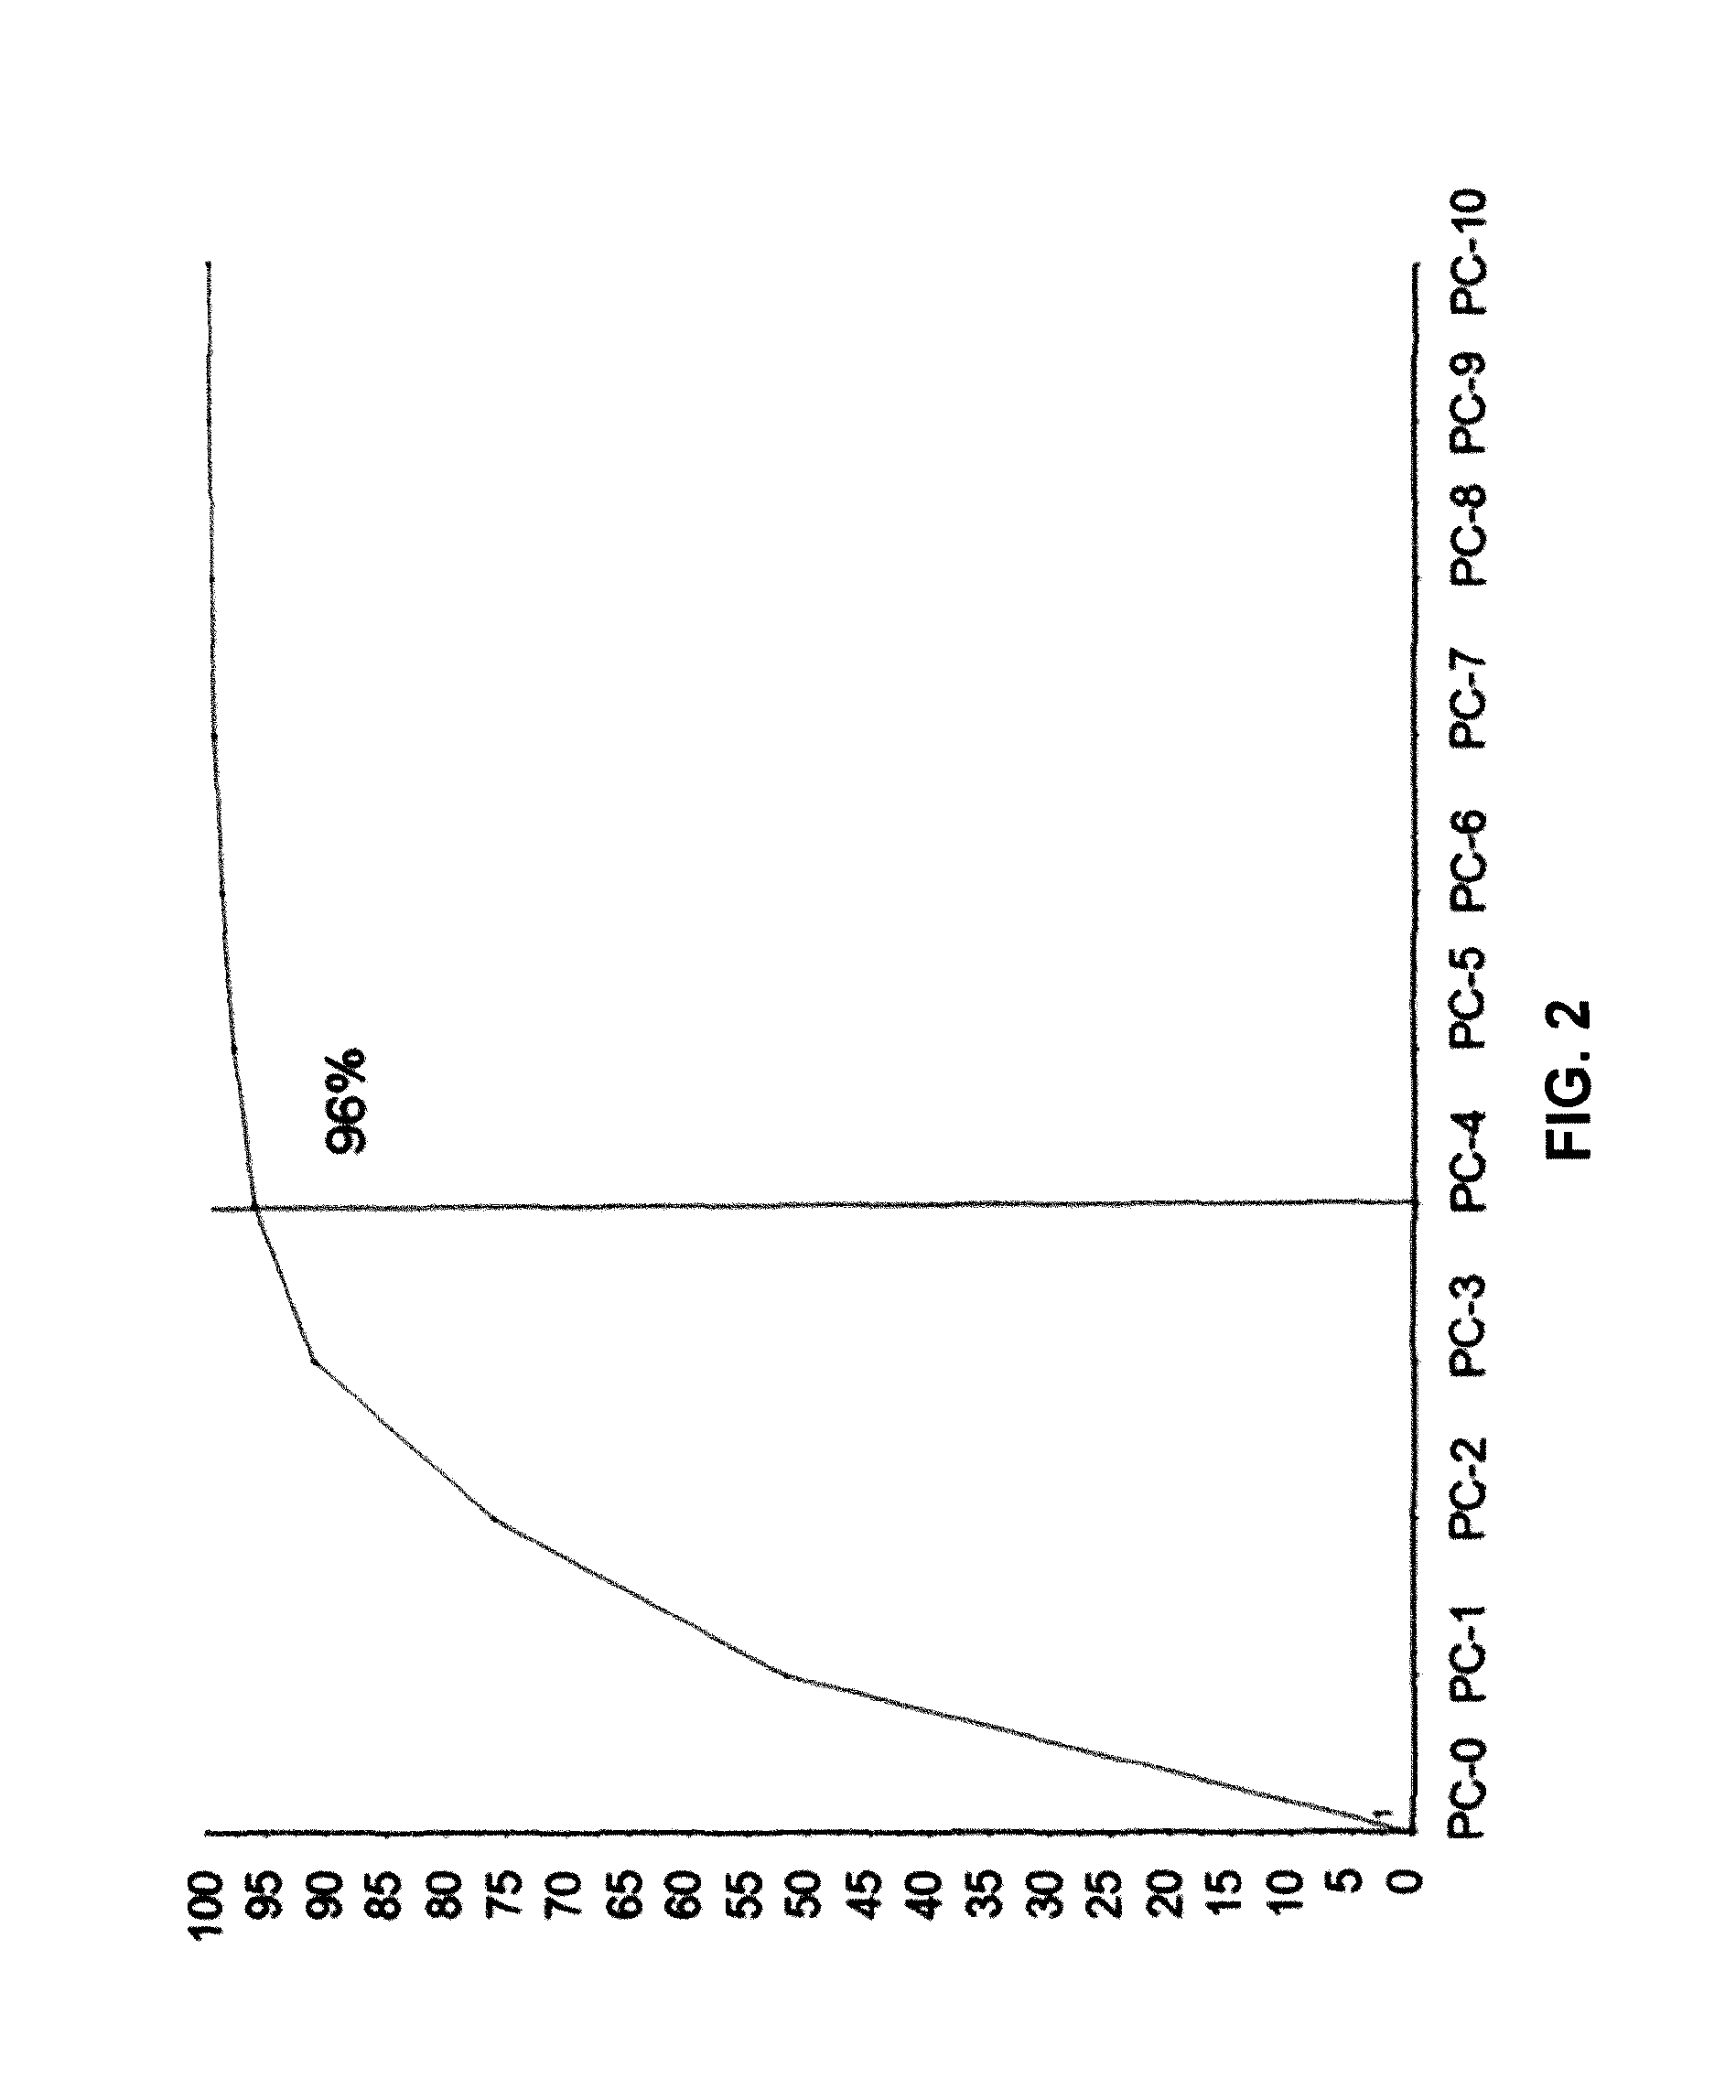 Process for controlling the quality of a freeze-drying process